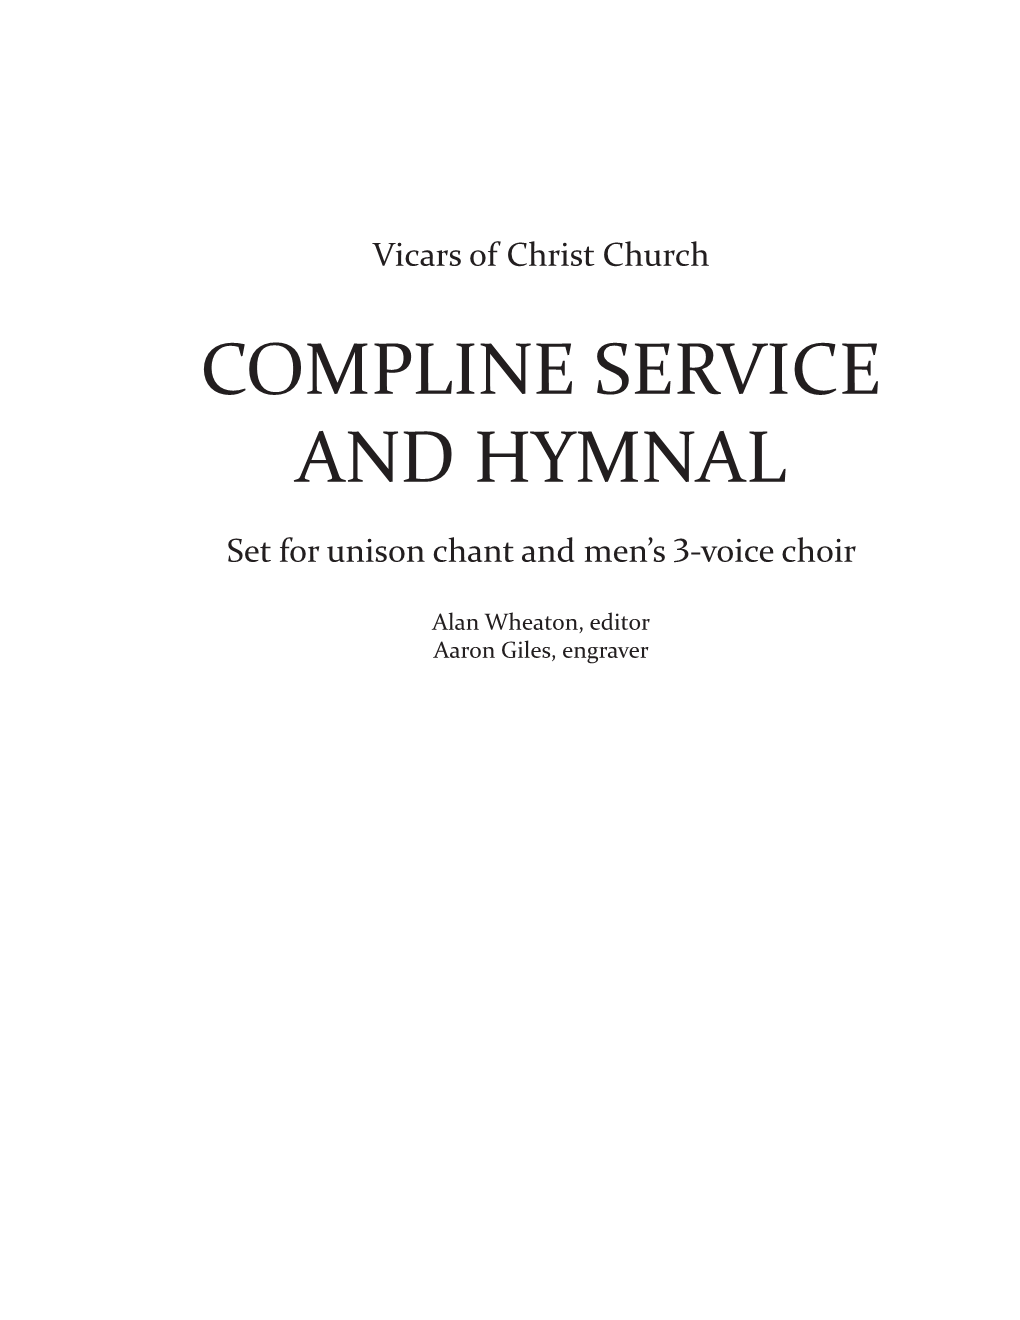 Compline Service and Hymnal